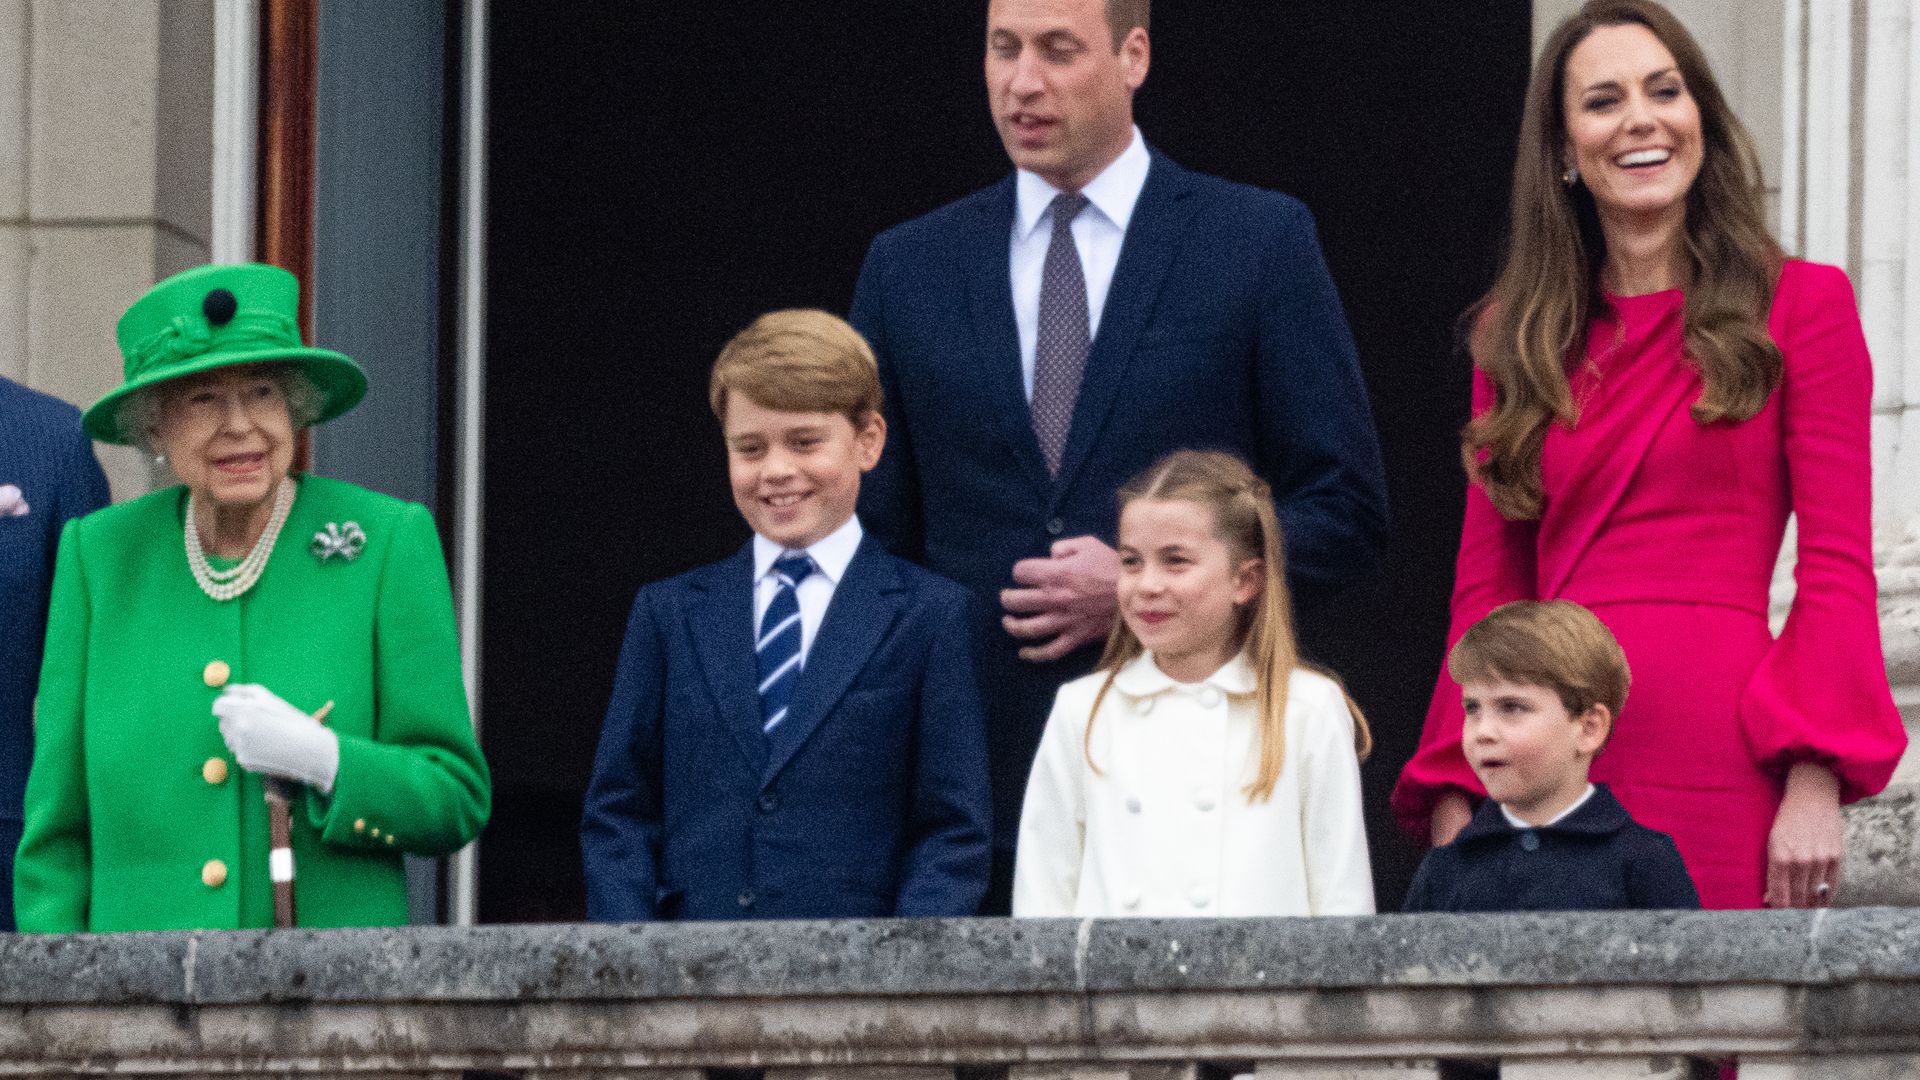 Prince George of Cambridge, Prince William, Duke of Cambridge, Princess Charlotte of Cambridge, Duchess of Cambridge and Prince Louis of Cambridge on the balcony during the Platinum Jubilee Pageant on June 05, 2022